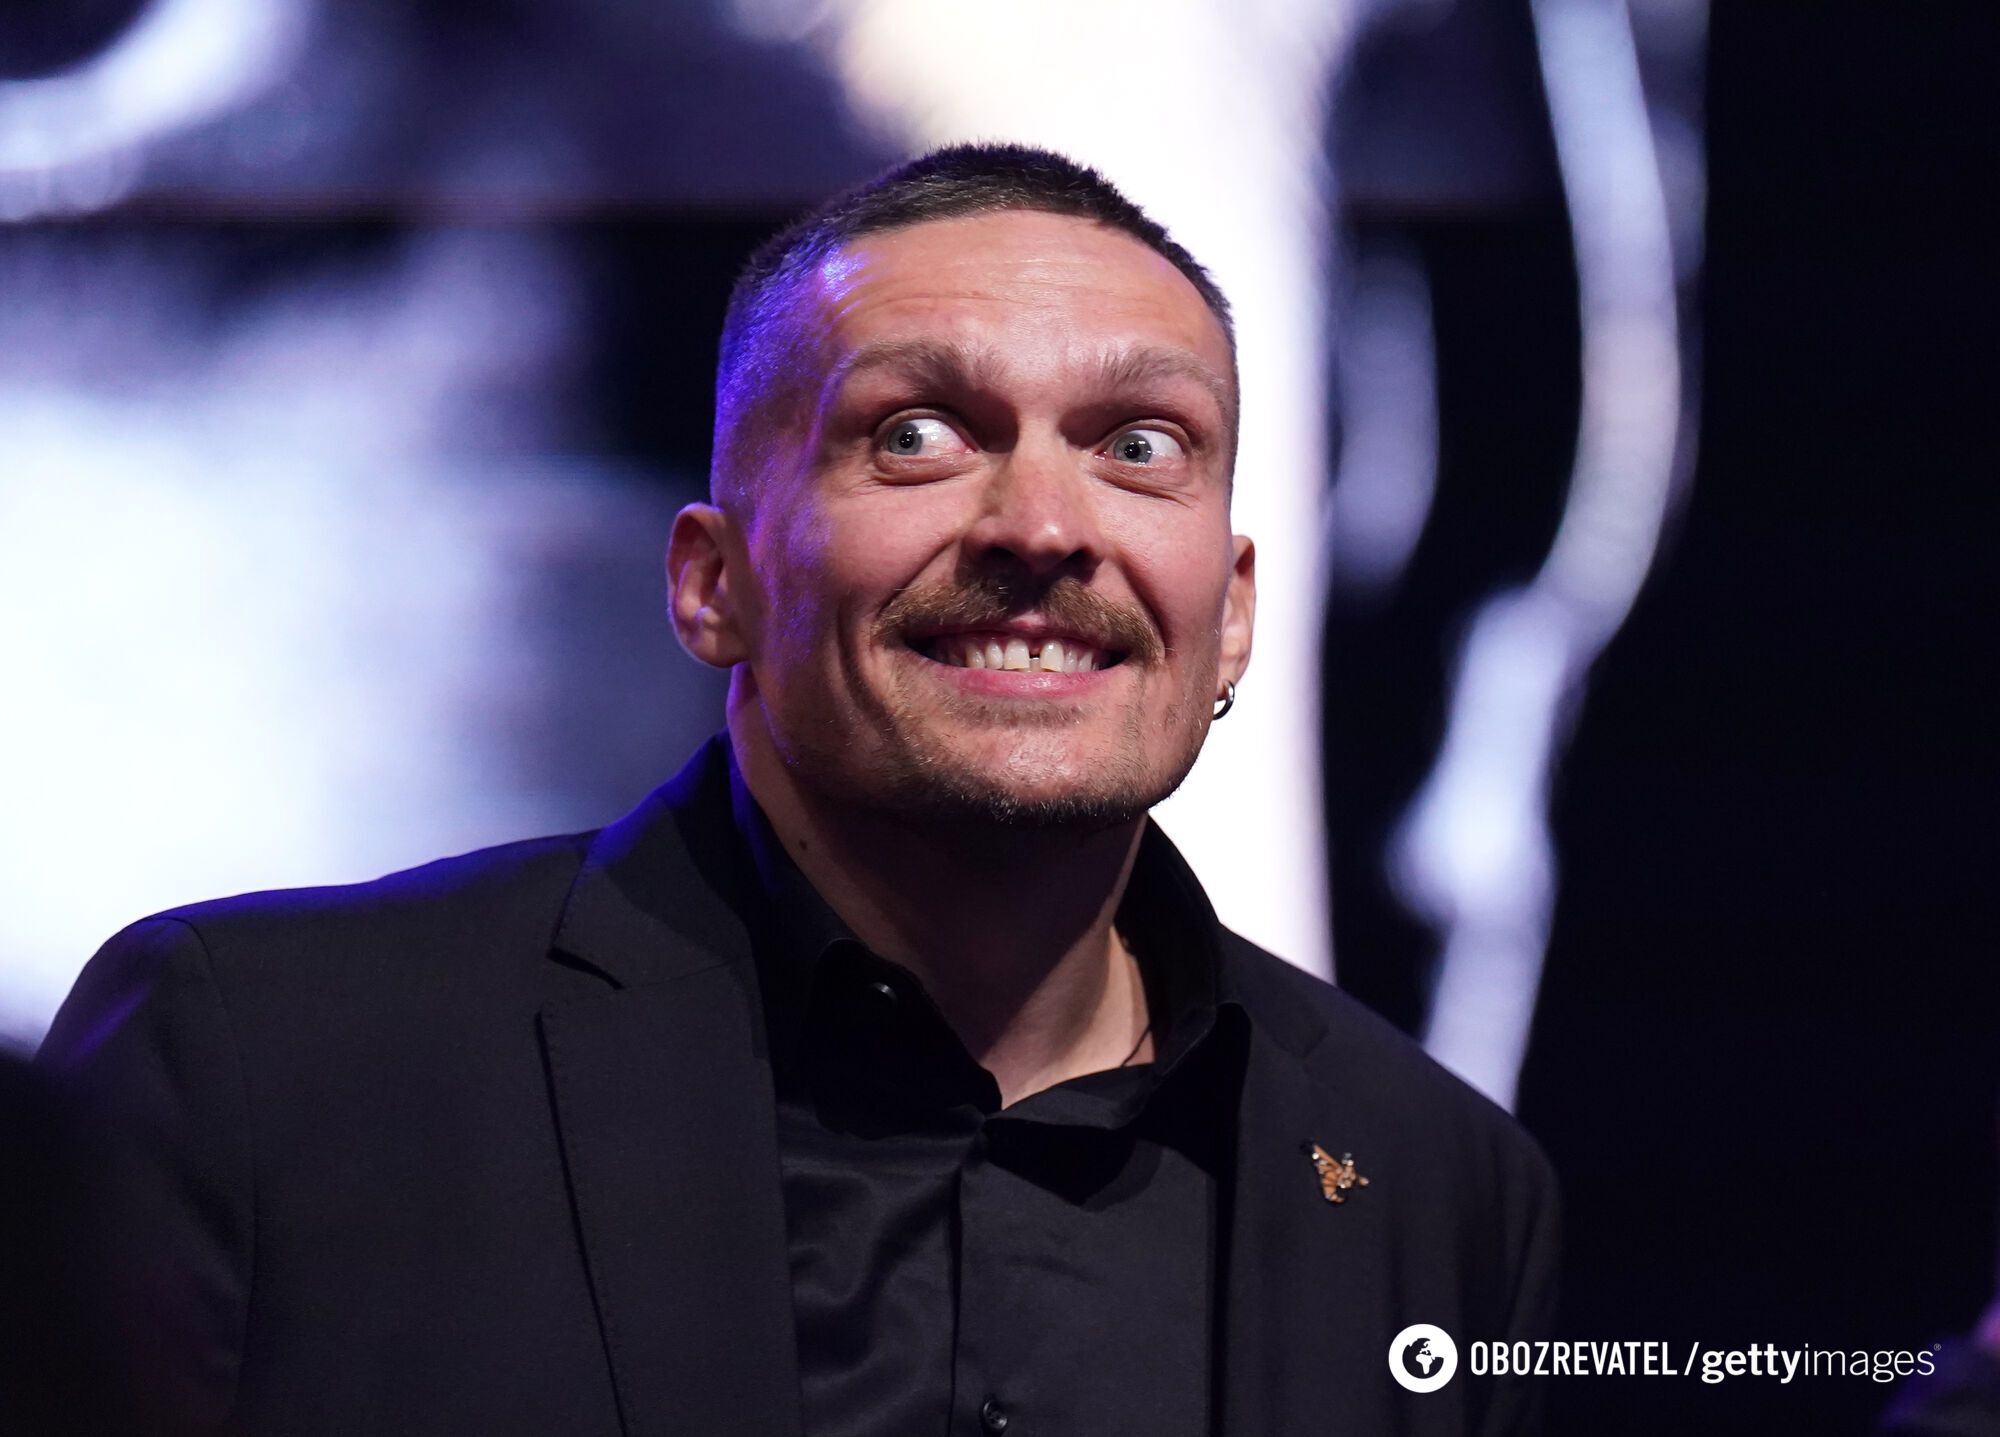 ''He will not win.'' The boxing legend made an unequivocal prediction for the Usyk-Fury fight